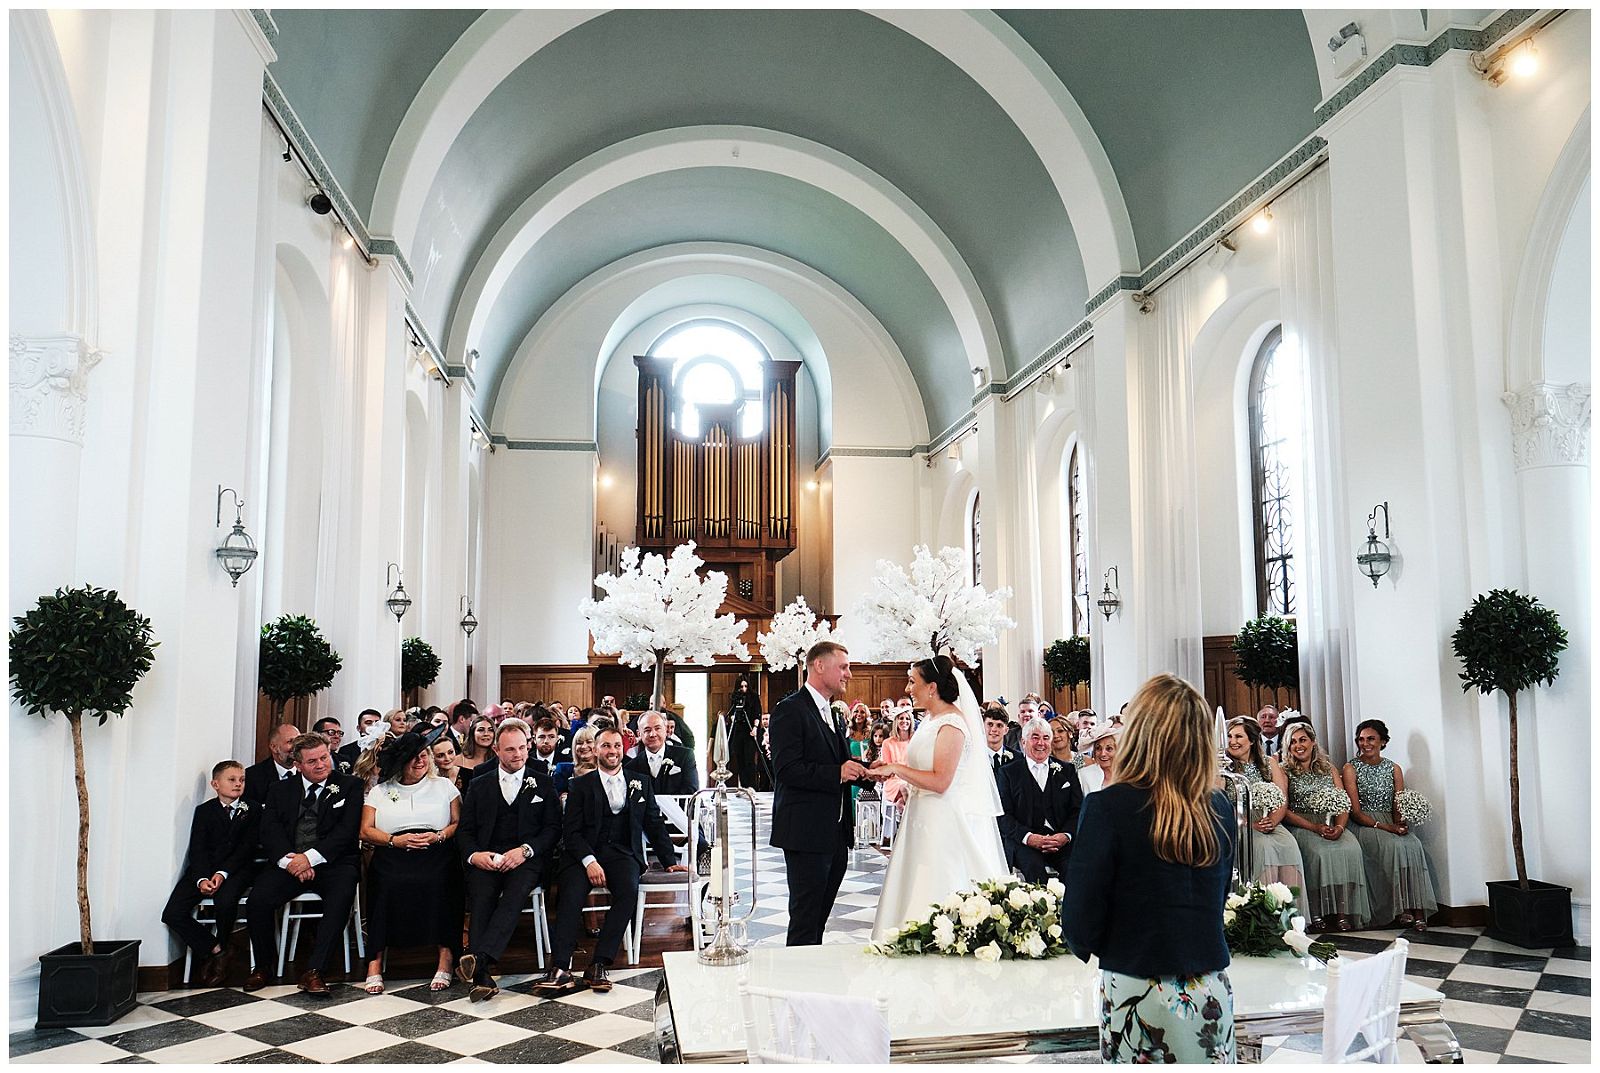 Capturing the exchange of rings at Hawkstone Hall in Shrewsbury by Documentary Wedding Photographer Stuart James